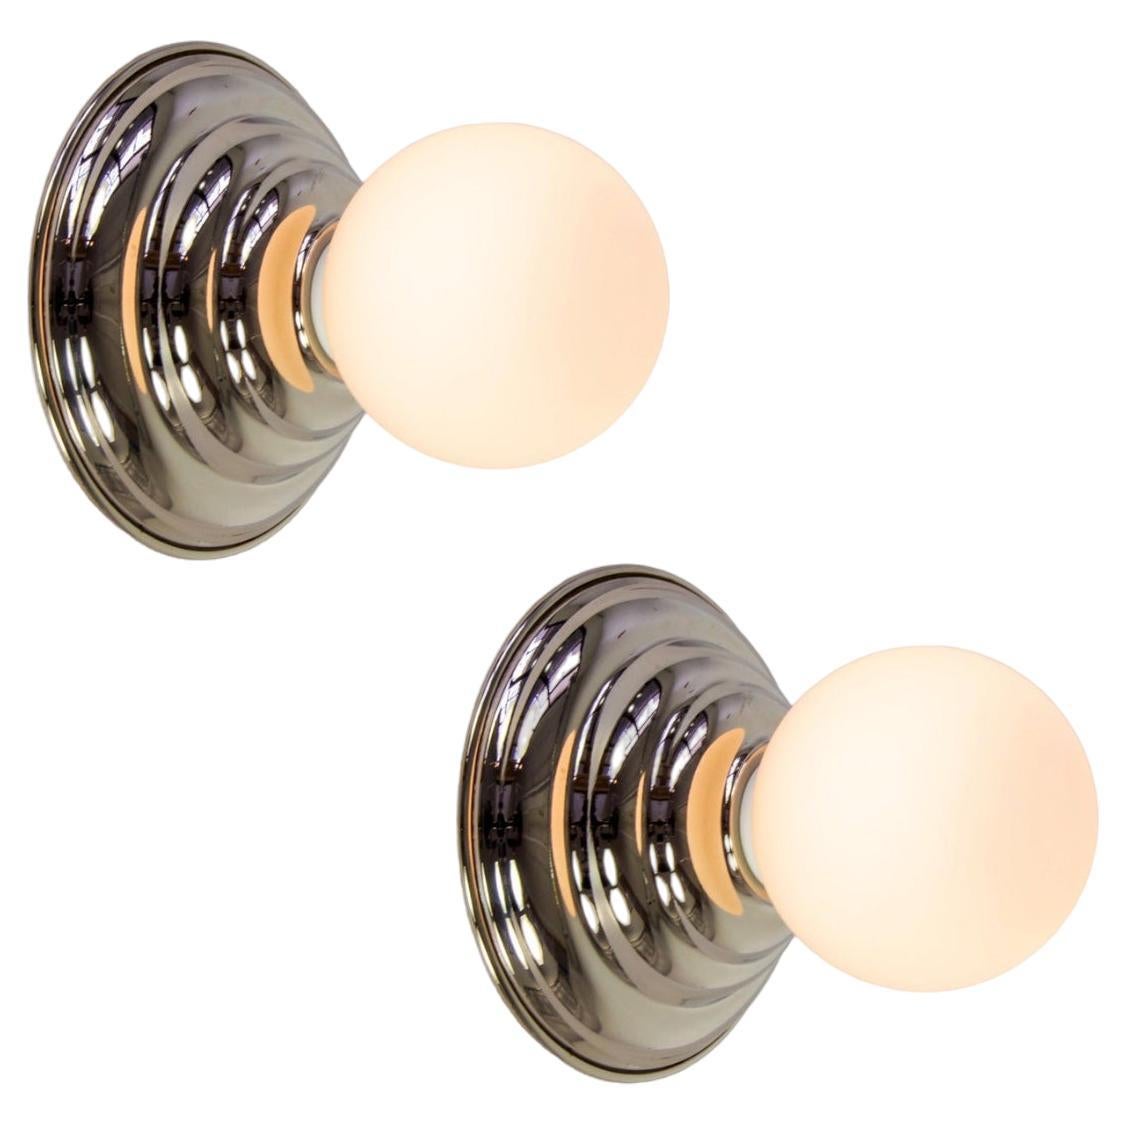 Pair of Hive Sconces by Research.Lighting, Polished Nickel, Made to Order